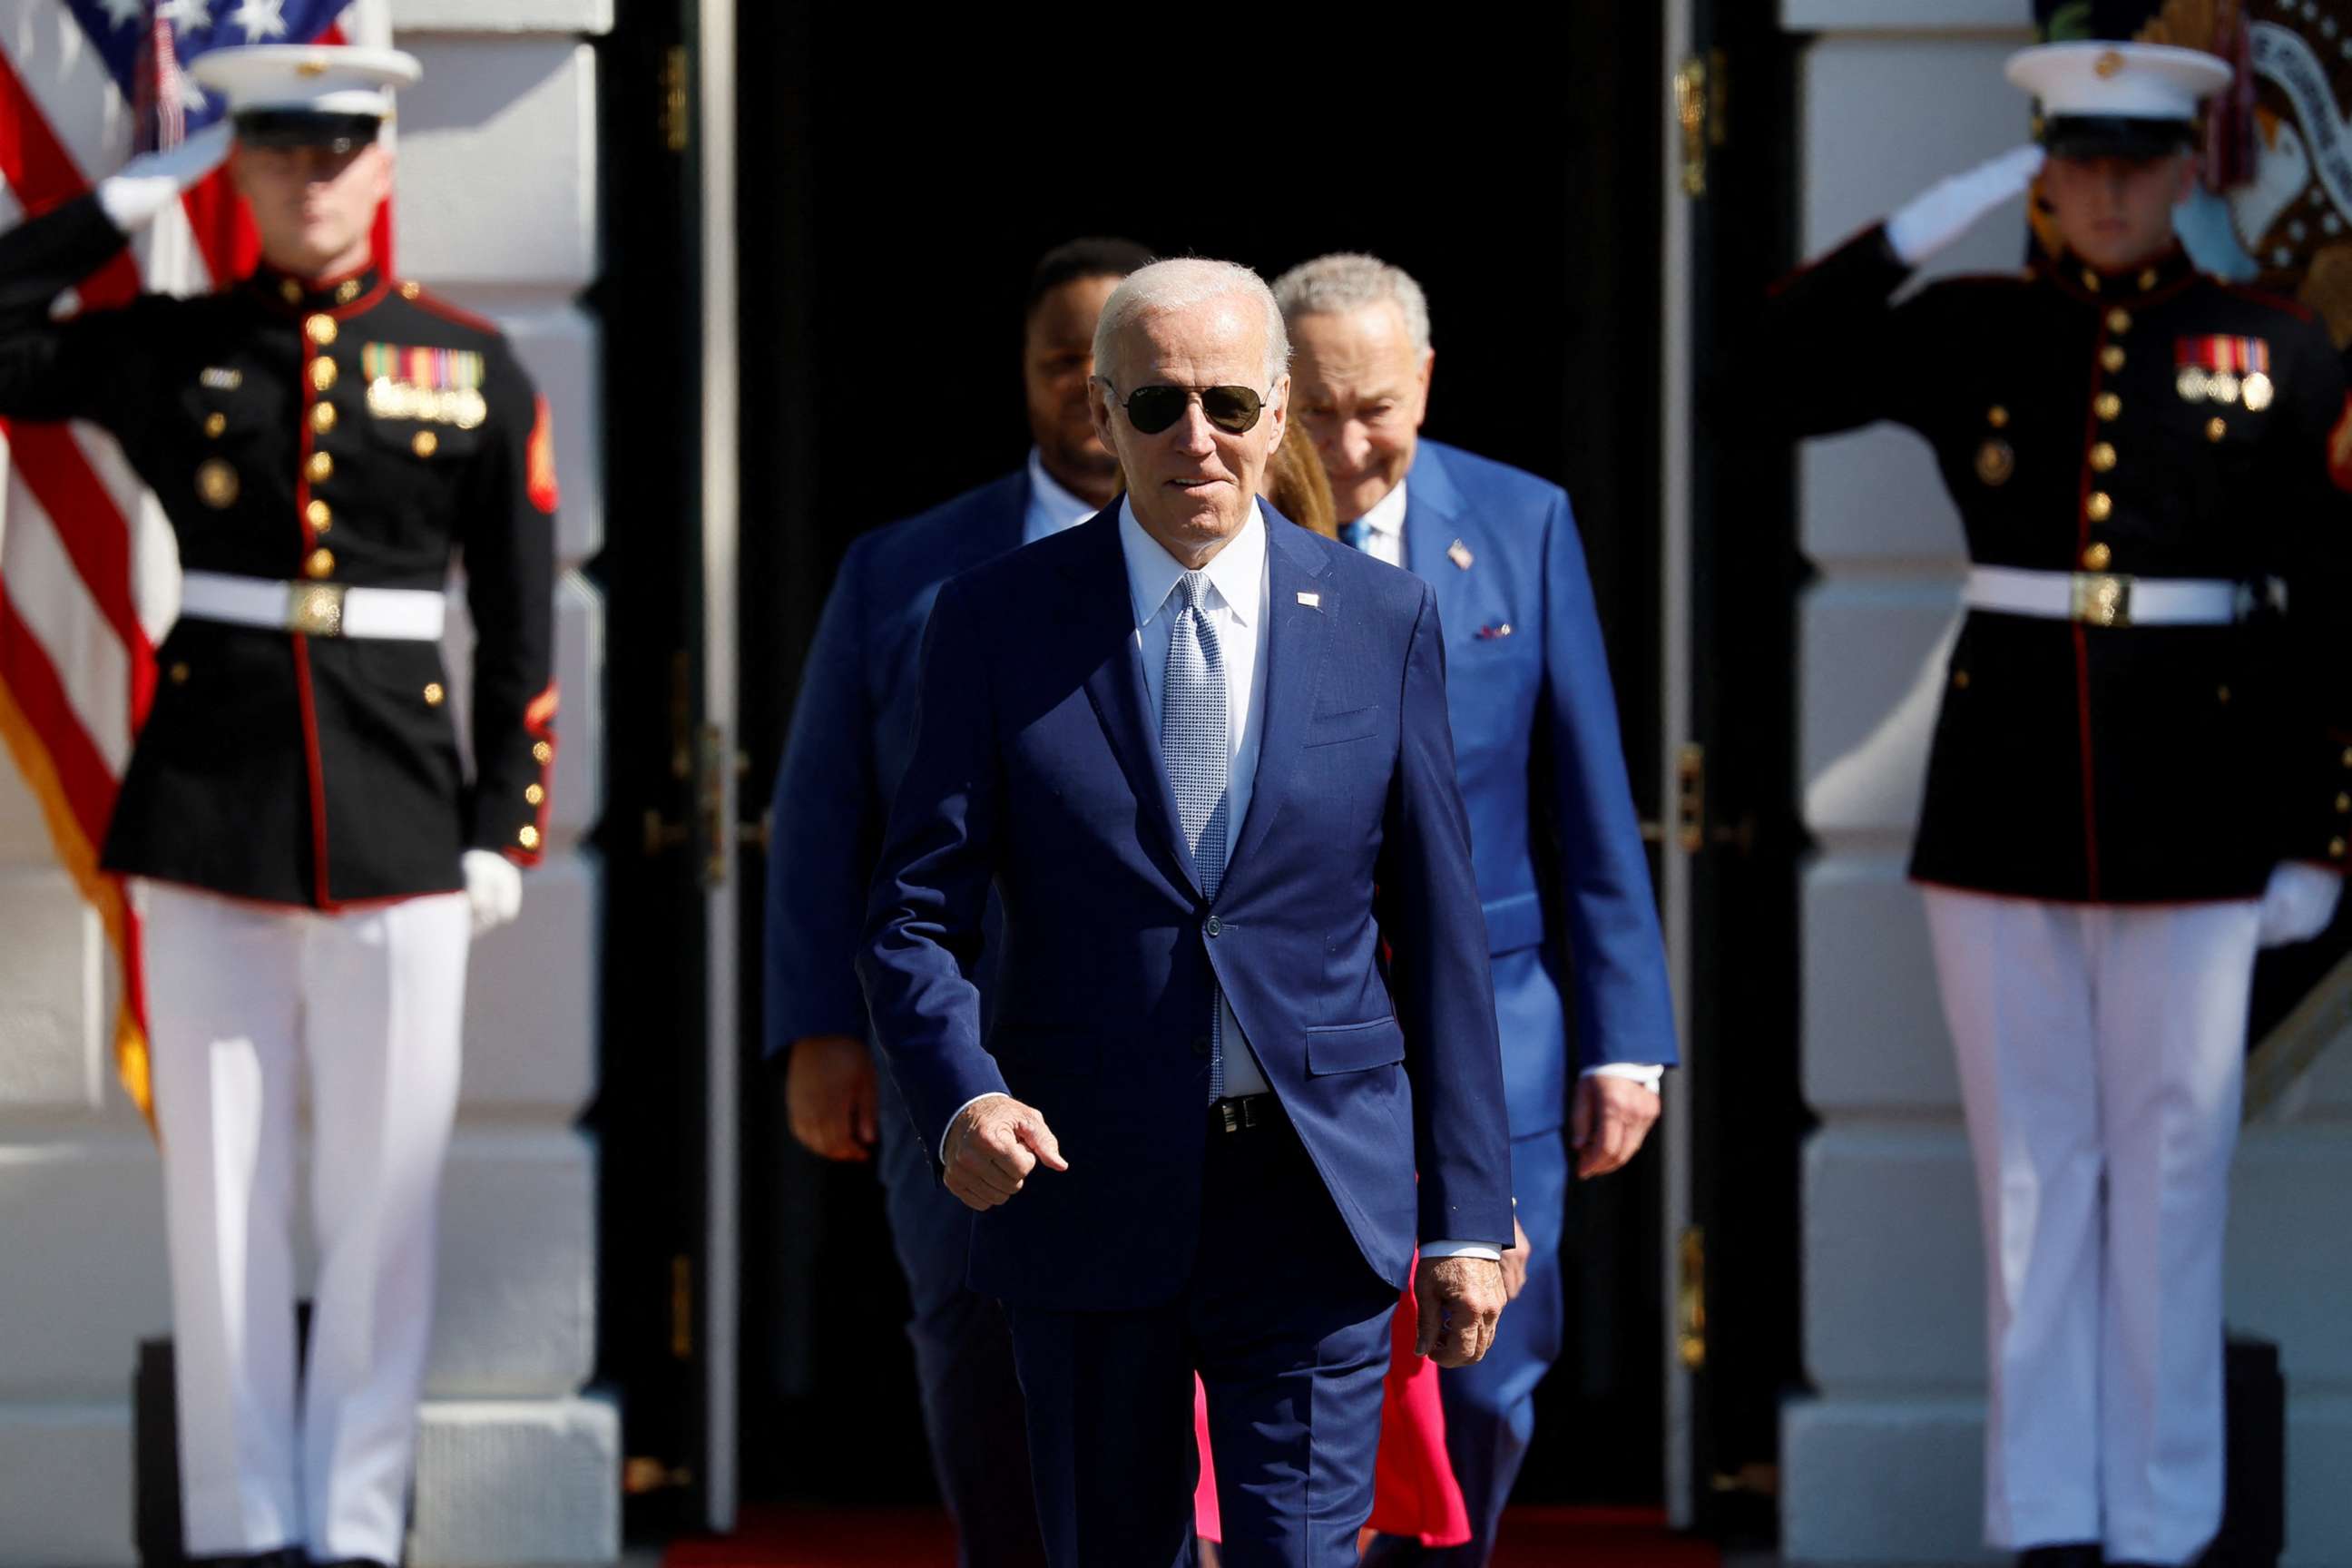 PHOTO: President Joe Biden walks to deliver remarks and sign the CHIPS and Science Act of 2022, on the South Lawn of the White House in Washington, Aug. 9, 2022.